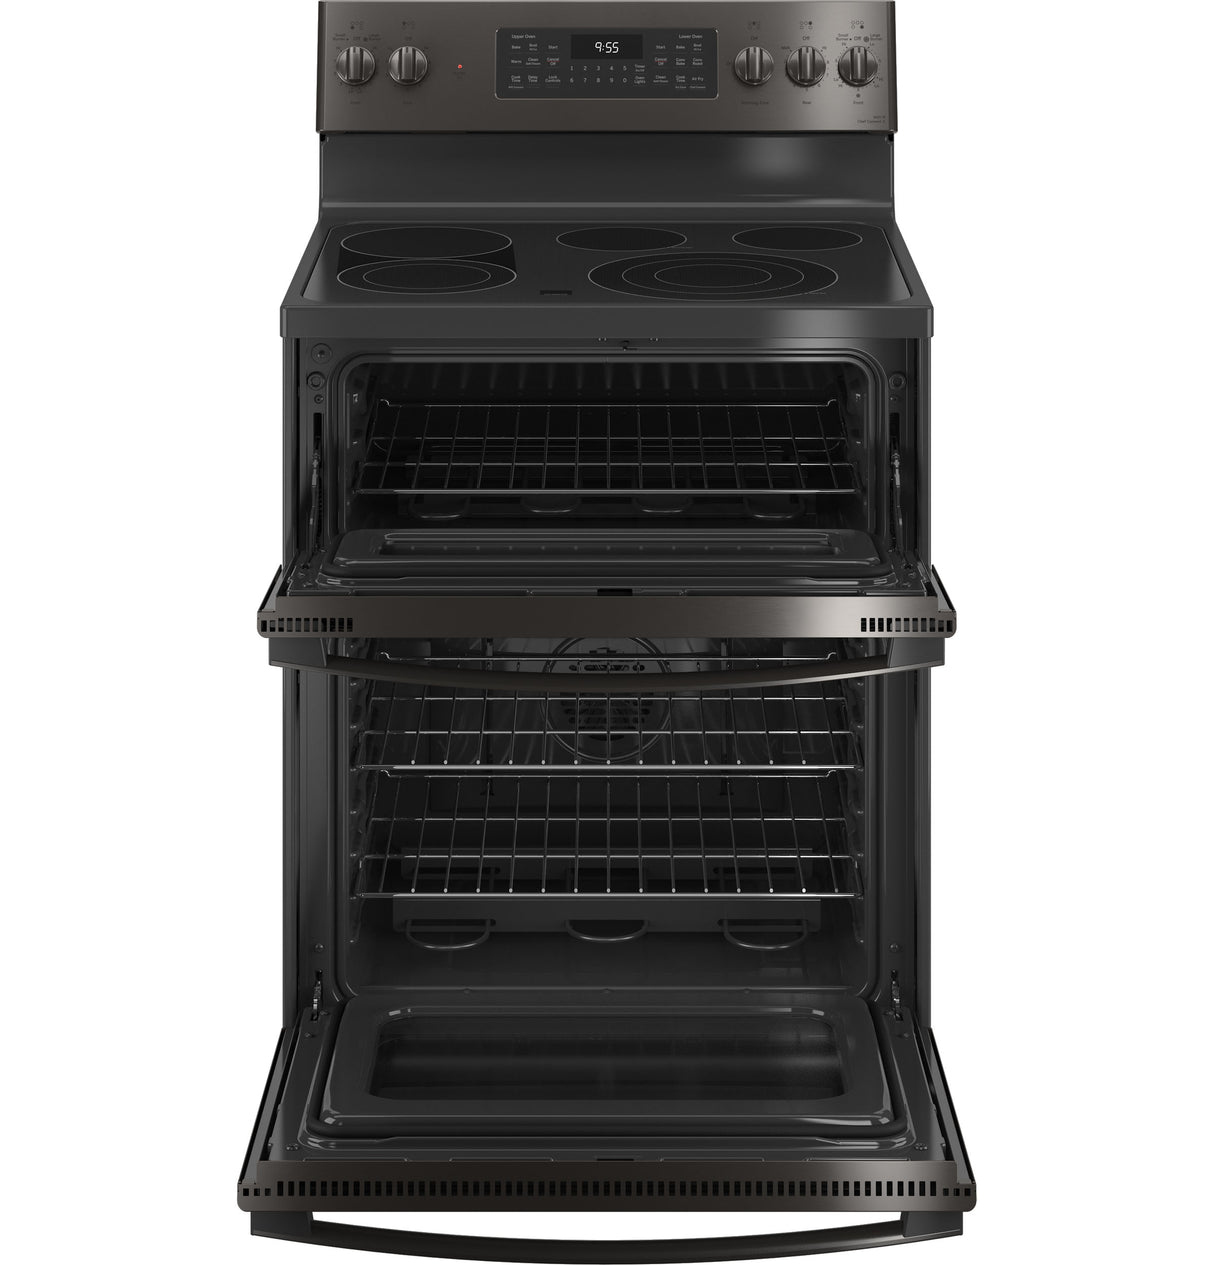 GE Profile(TM) 30" Smart Free-Standing Electric Double Oven Convection Range with No Preheat Air Fry - (PB965BPTS)